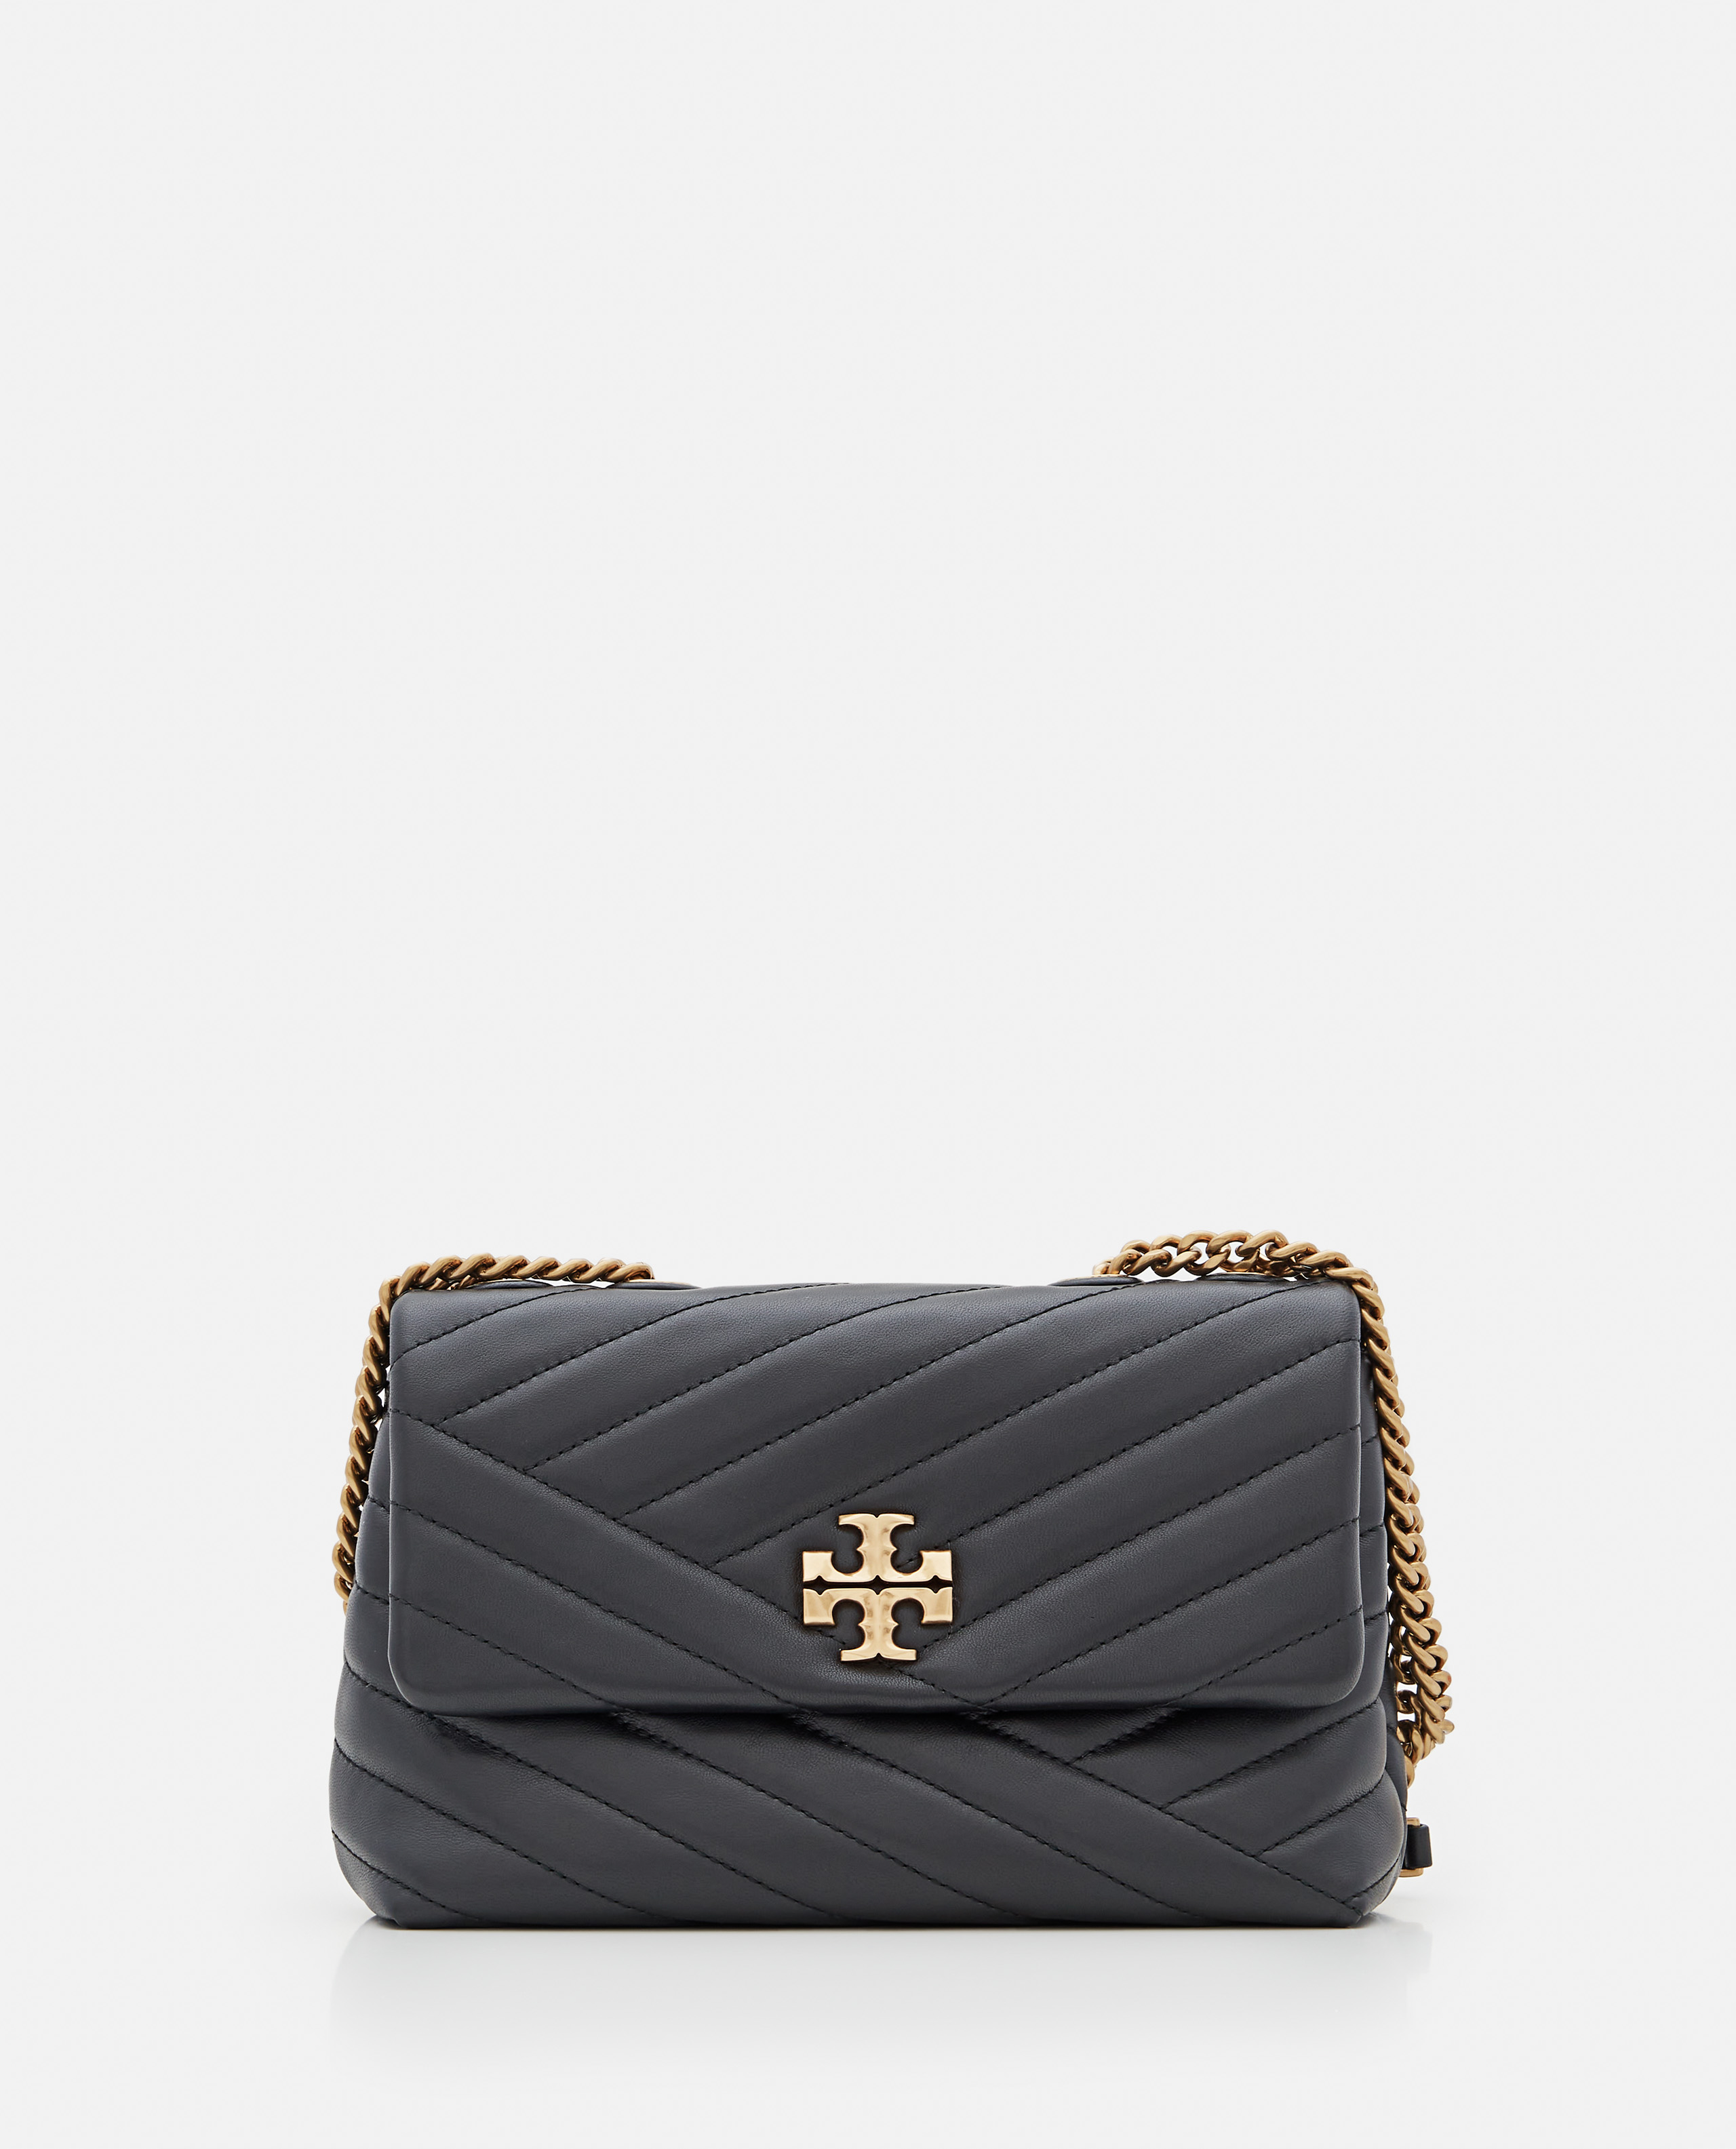 Tory Burch KIRA CHEVRON SMALL CONVERTIBLE LEATHER SHOULDER BAG size One  Size - Realry: A global fashion sites aggregator